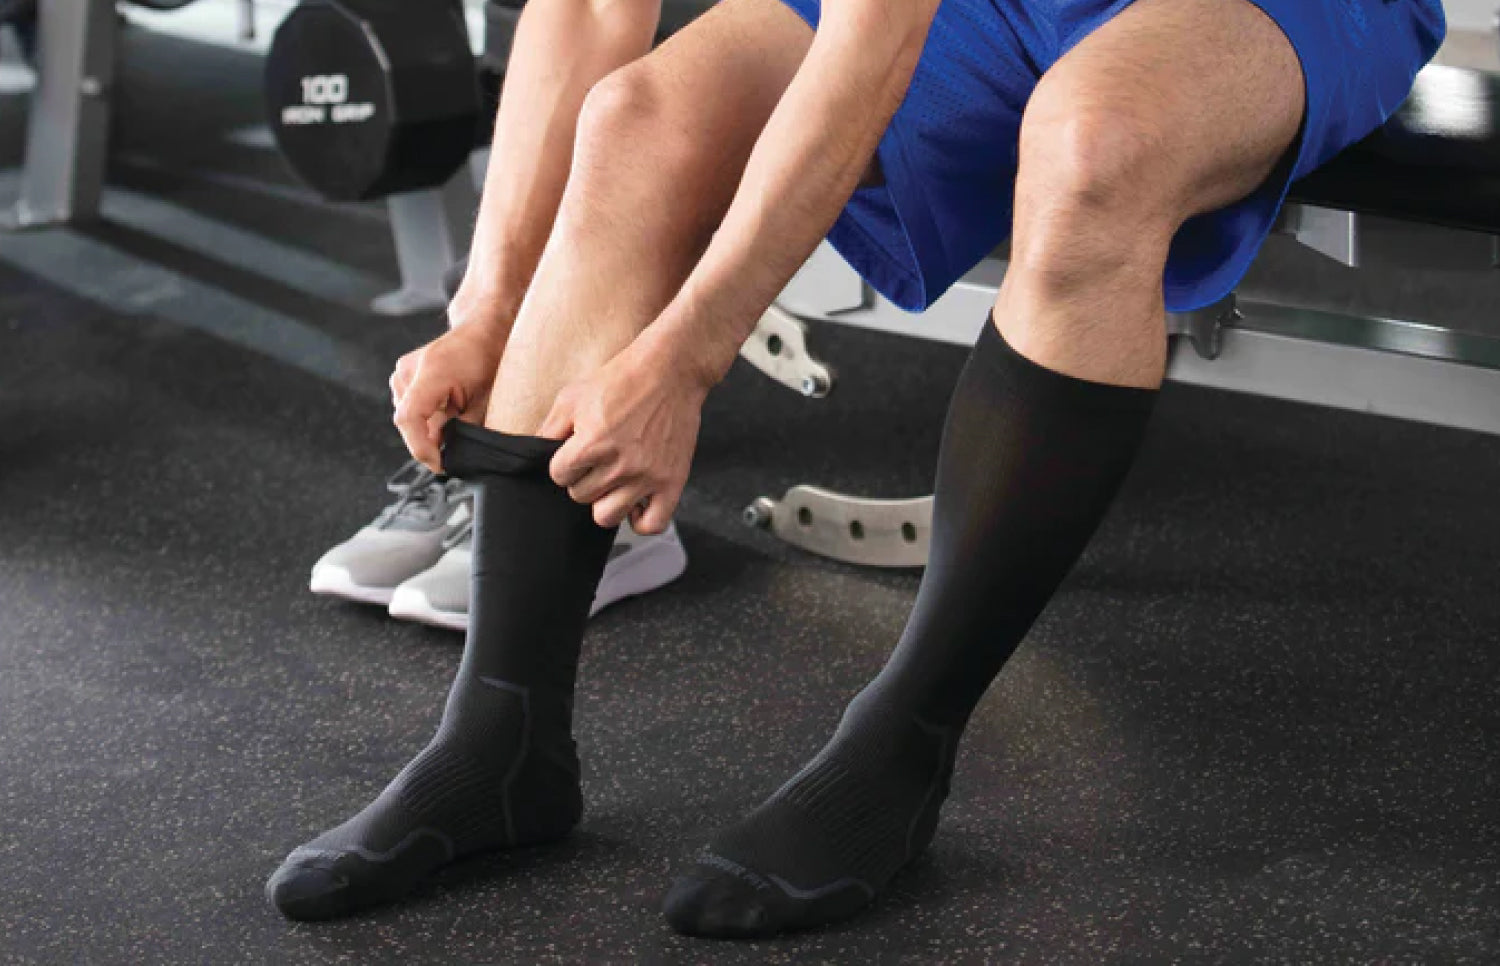 SPORTS COMPRESSION  BEFORE DURING AND AFTER PHYSICAL EFFORTS